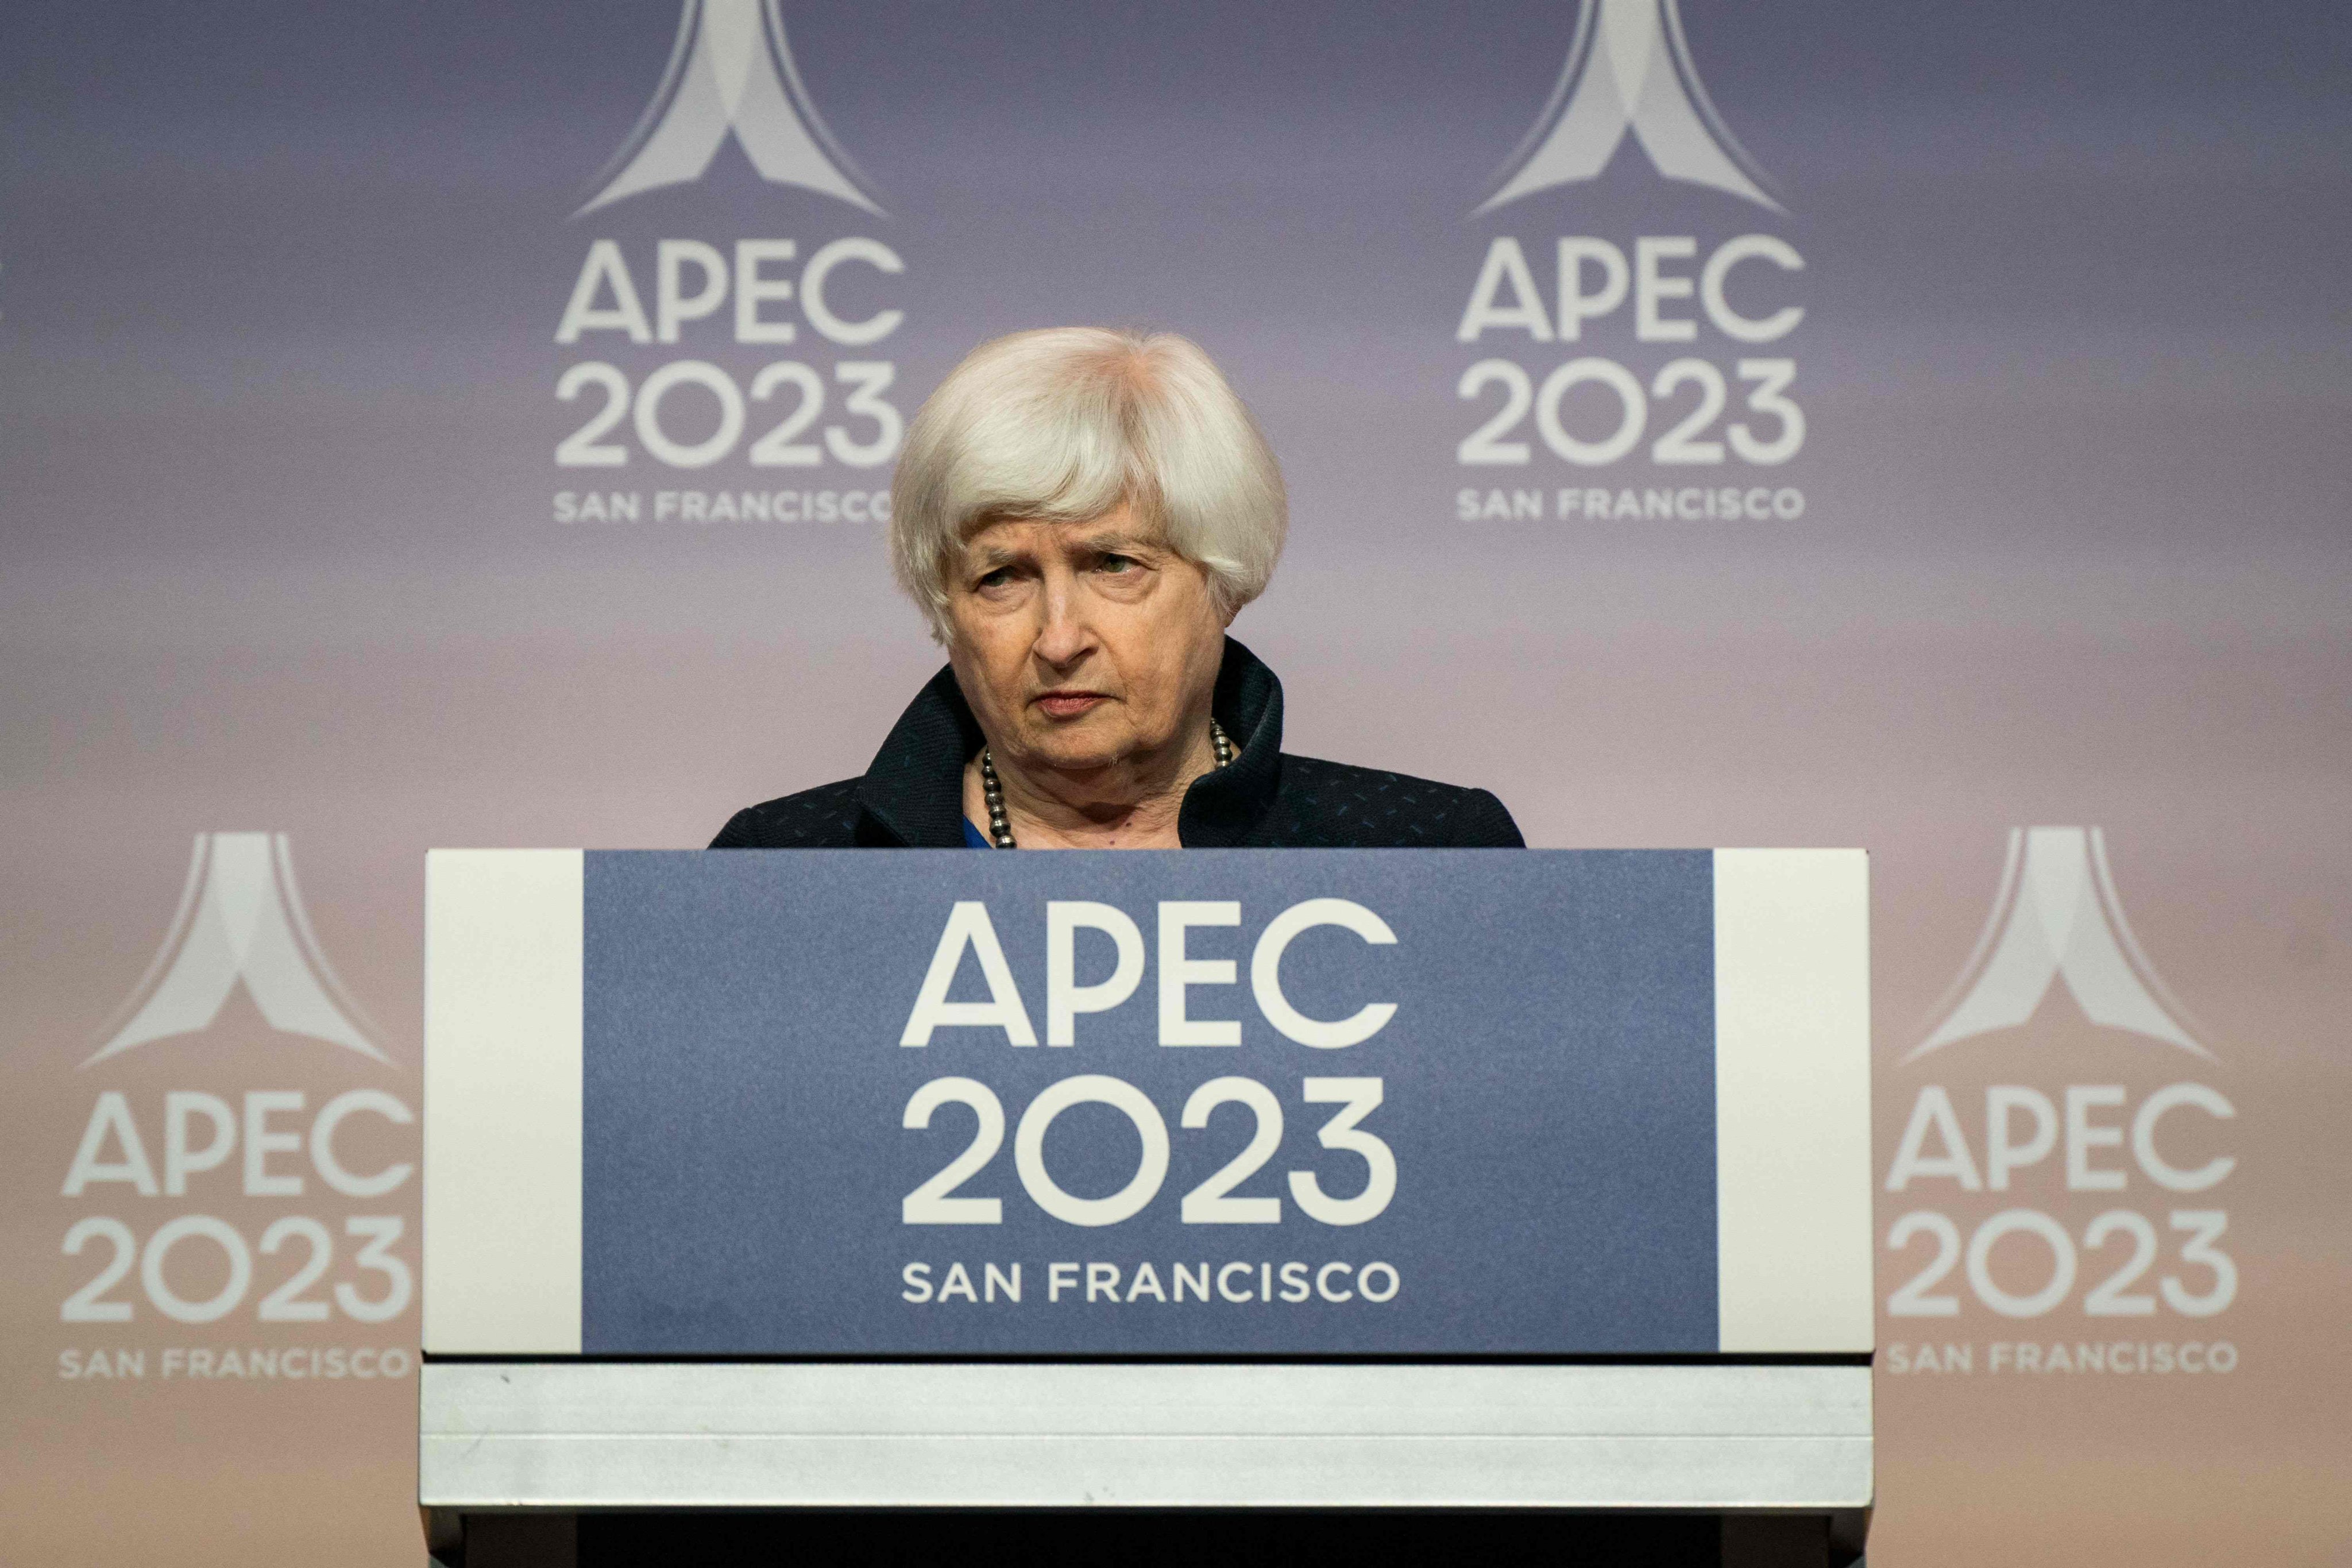 US Treasury Secretary Janet Yellen says Apec members discussed the slowing Chinese economy. Photo: Getty Images via AFP